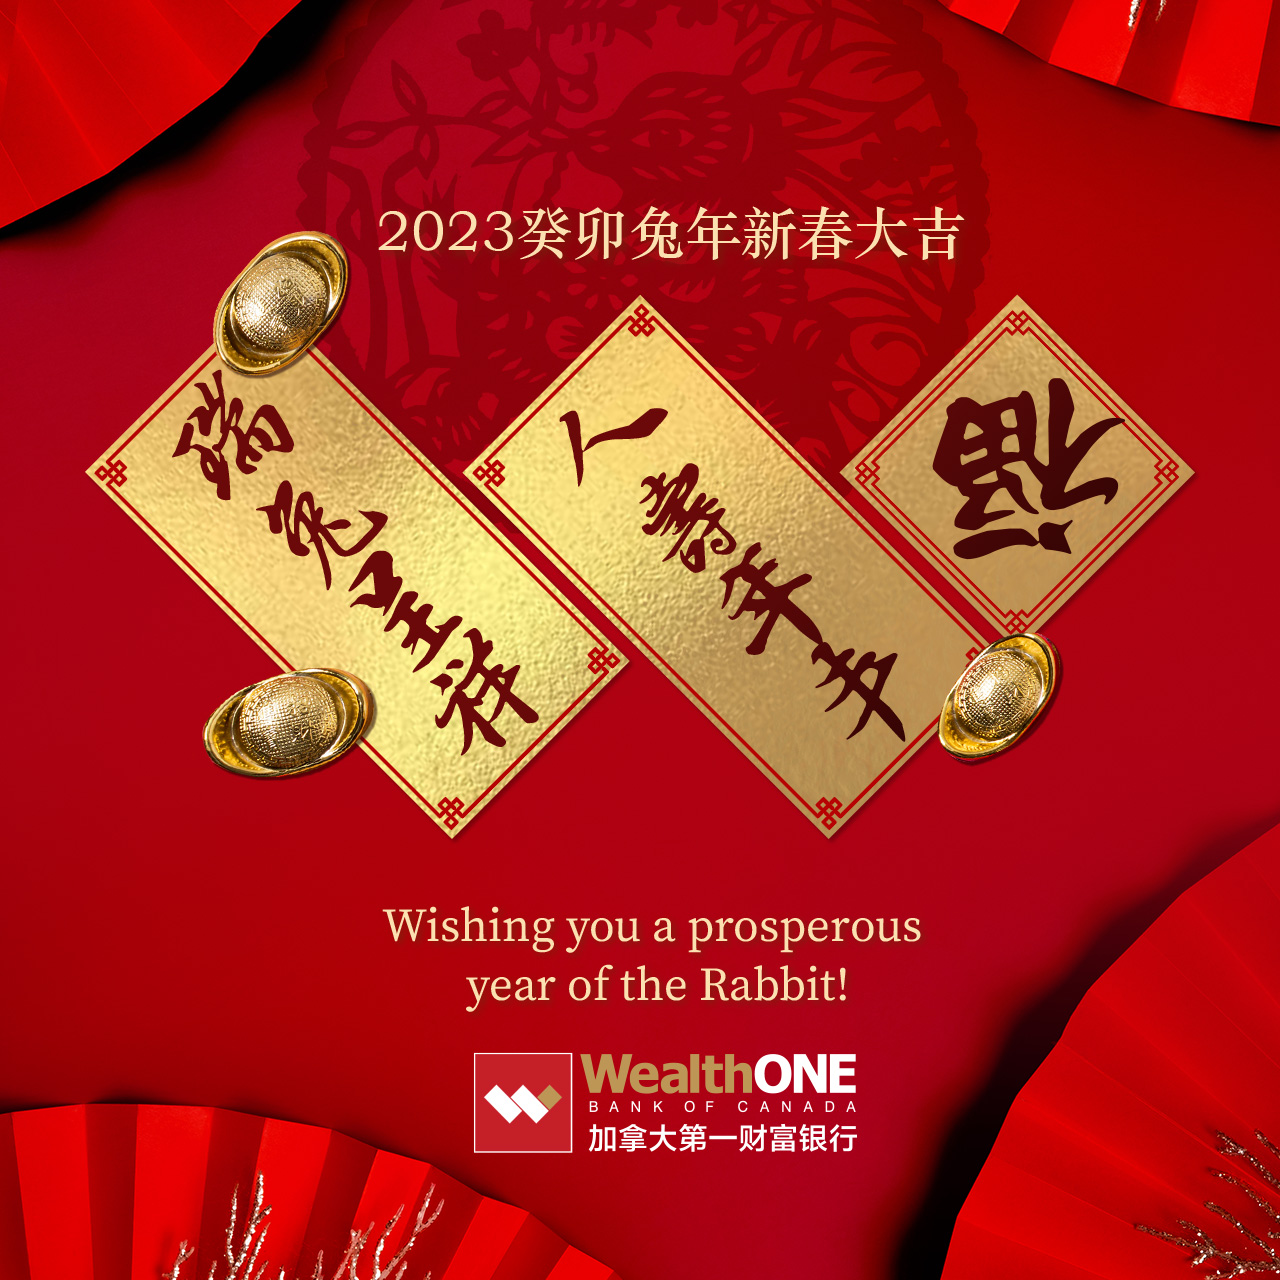 WealthONE wish you a happy year of the rabbit